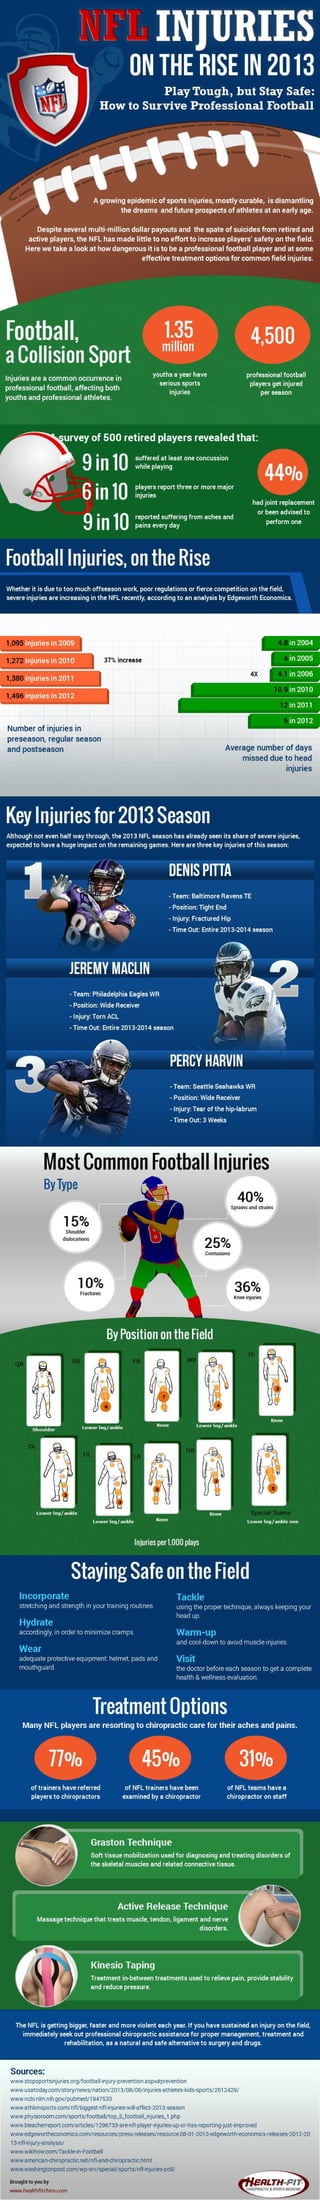 NFL Injuries on the Rise in 2013